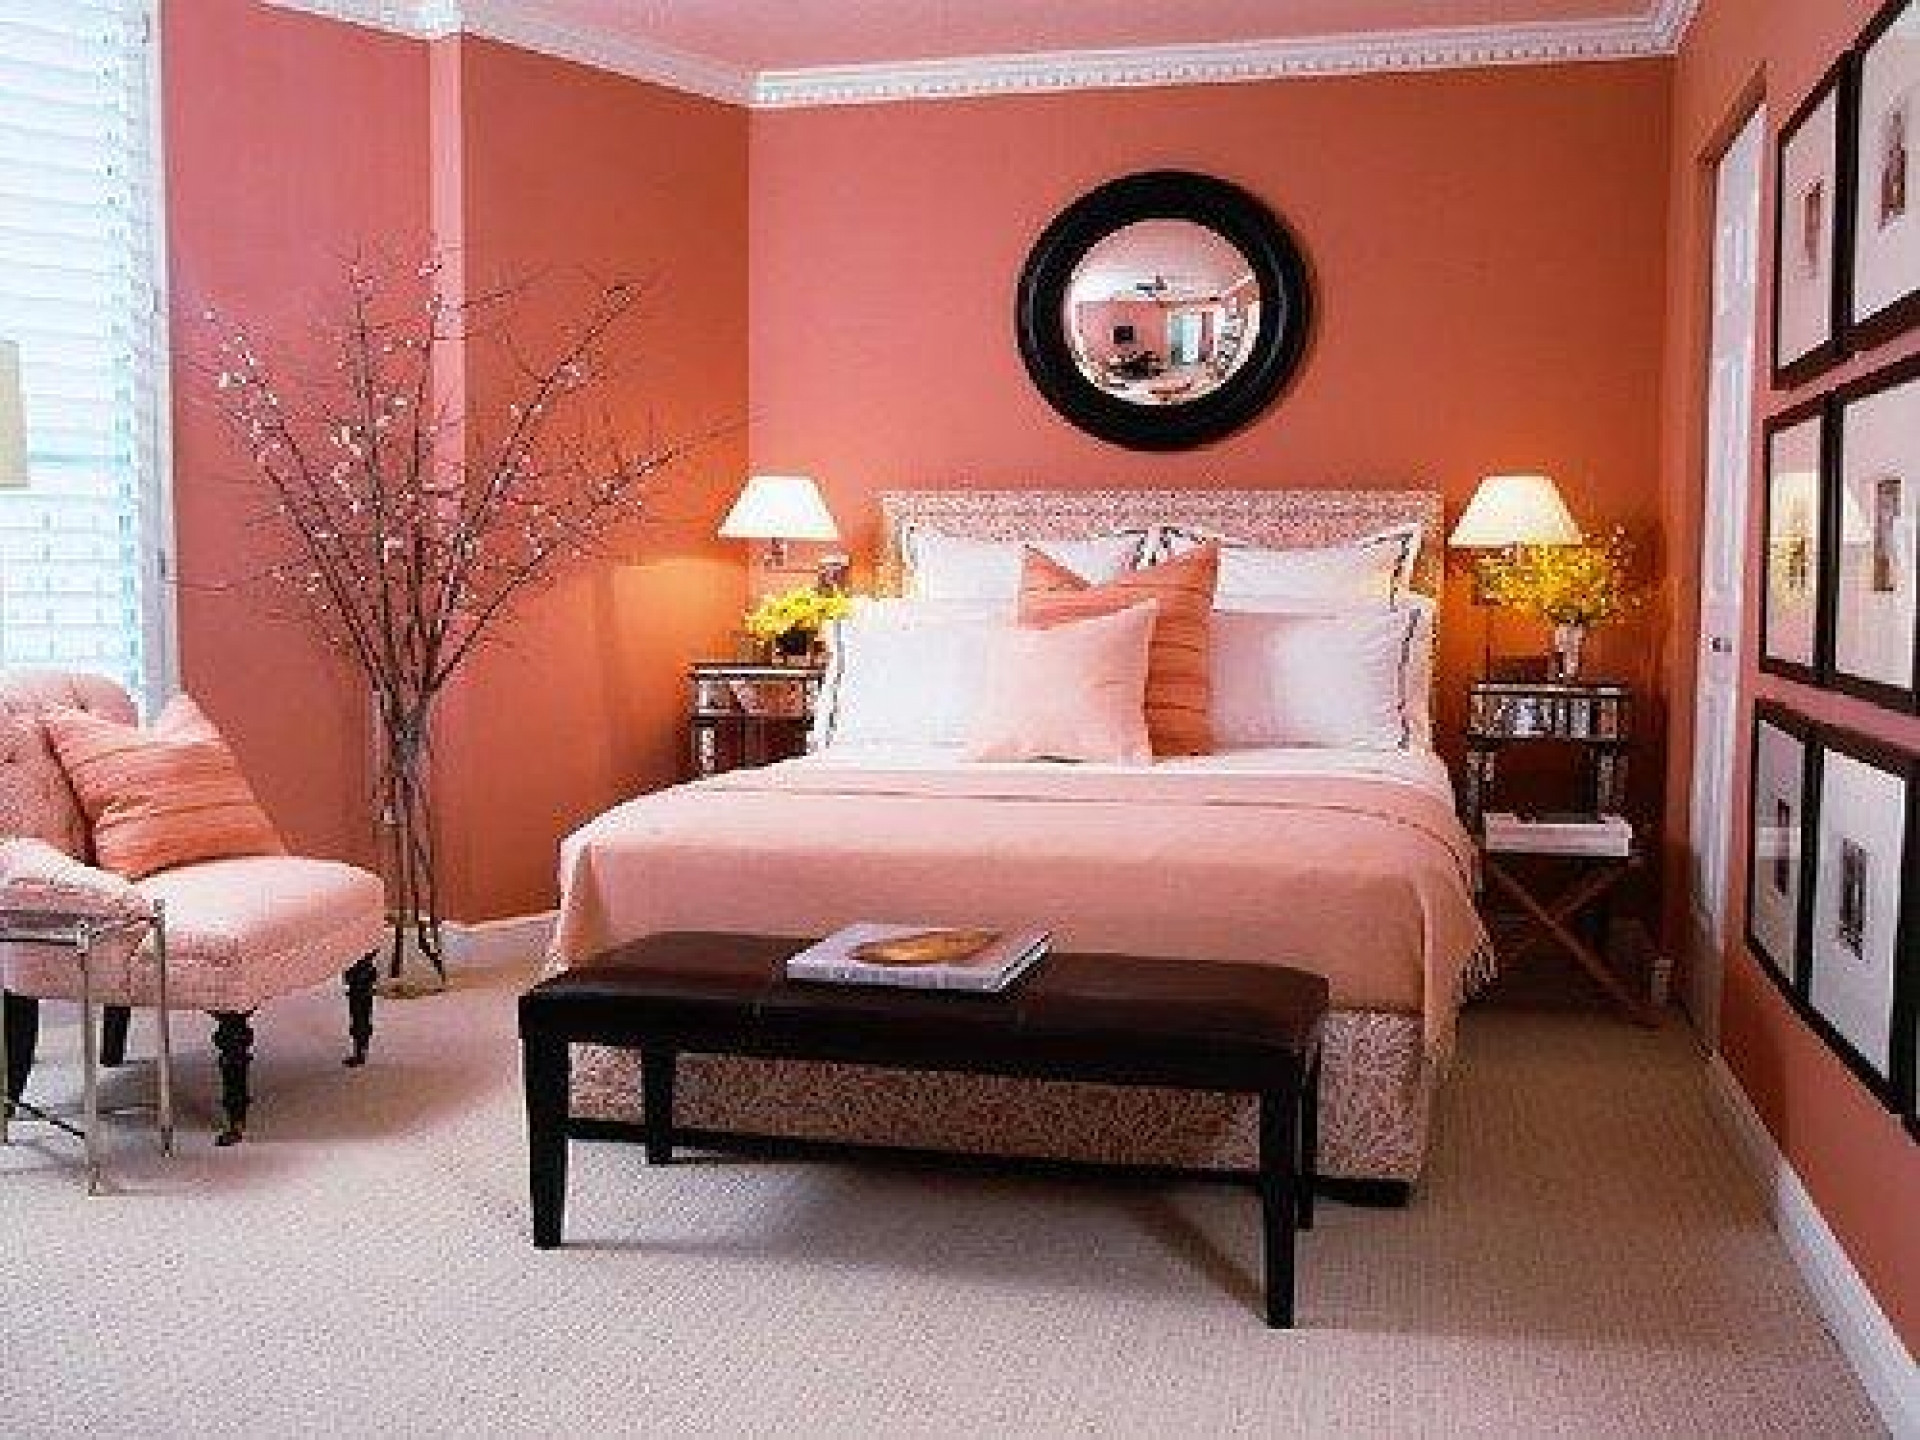 Pretty Bedroom Colors
 25 Beautiful Bedroom Ideas For Your Home – The WoW Style